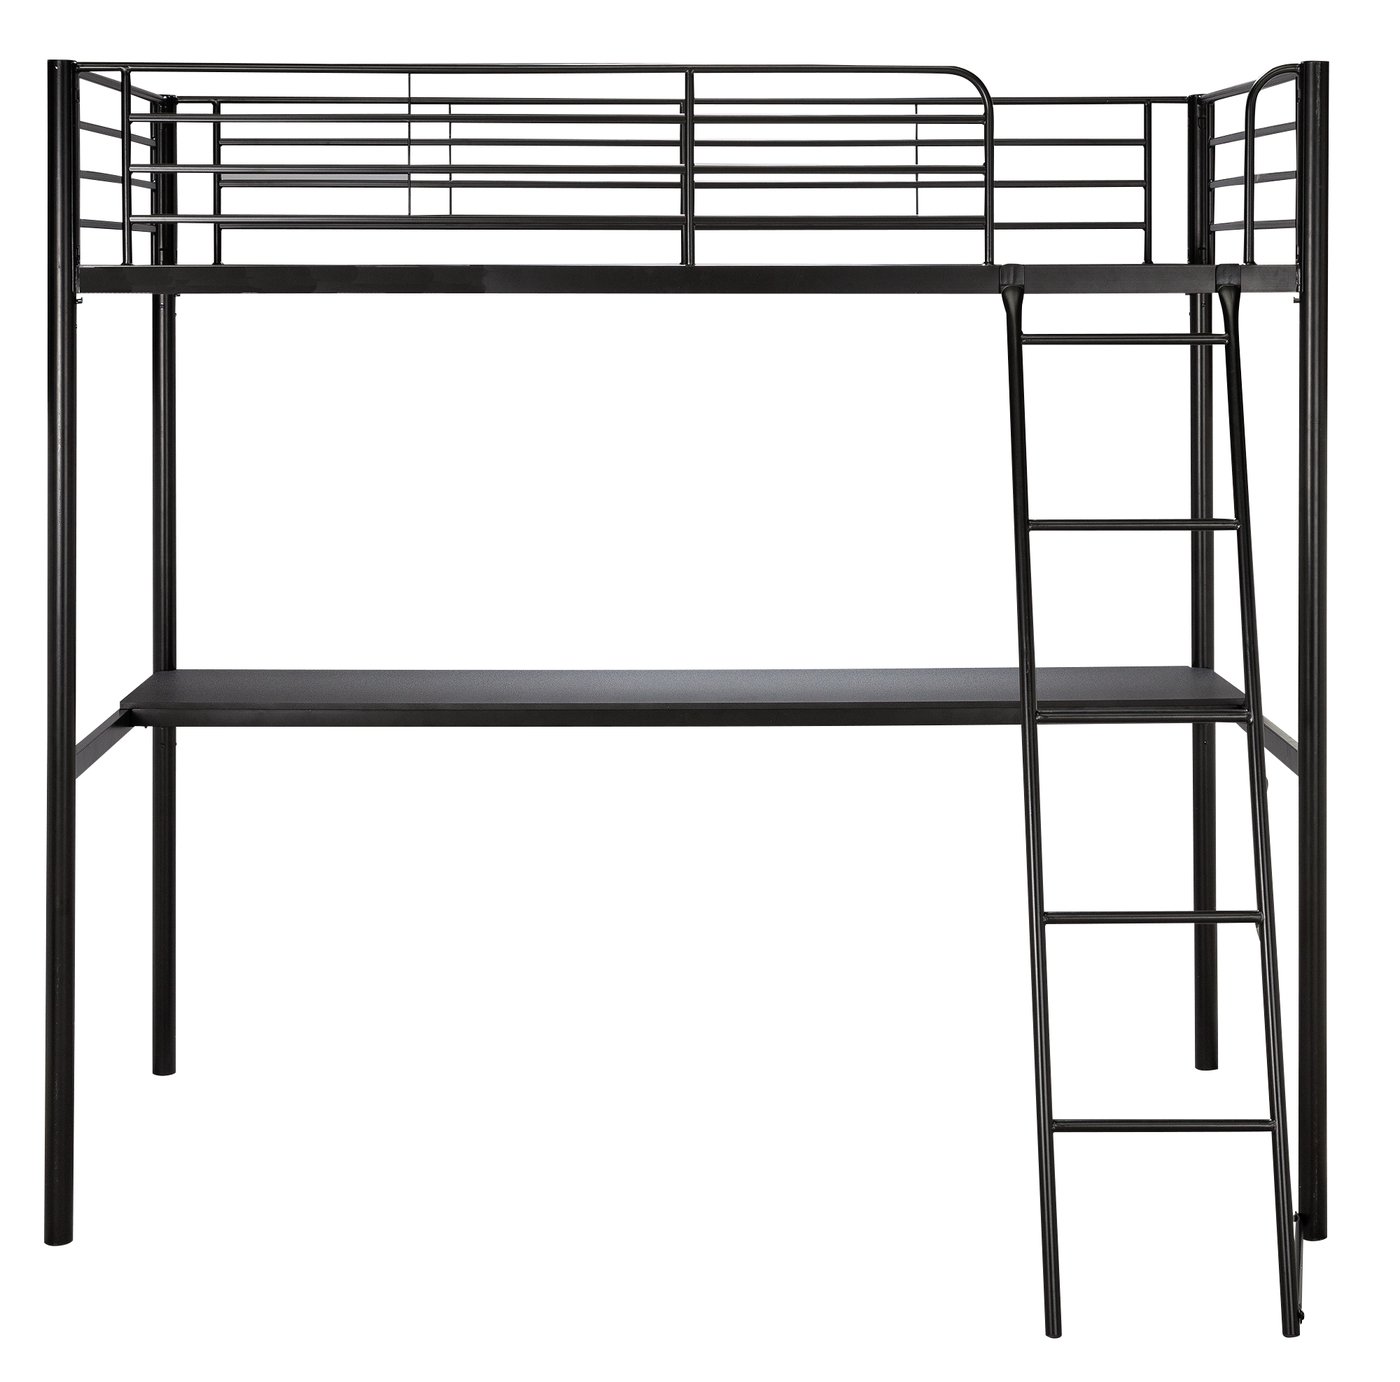 Argos Home Black High Sleeper Bed Frame with Desk Reviews